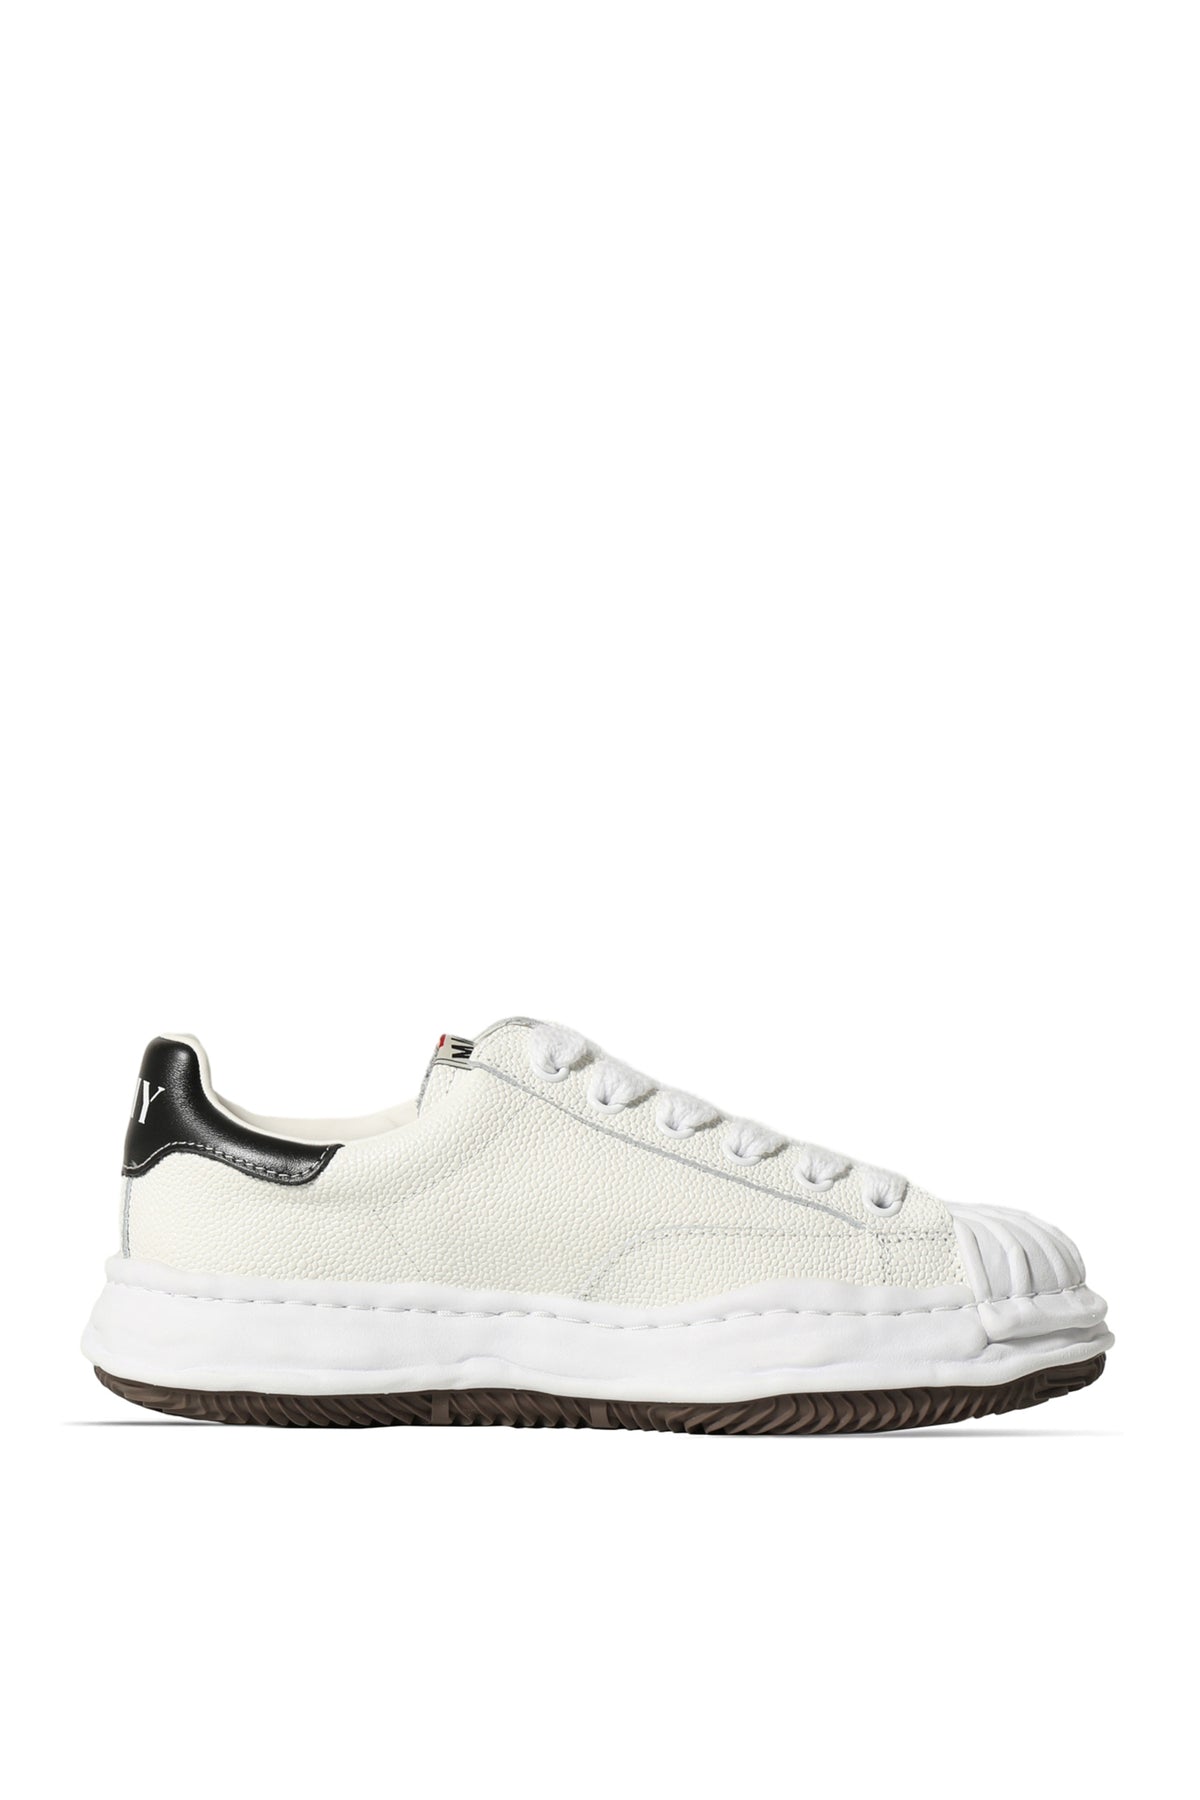 BLKY LOW BSKT LEATHER / WHT